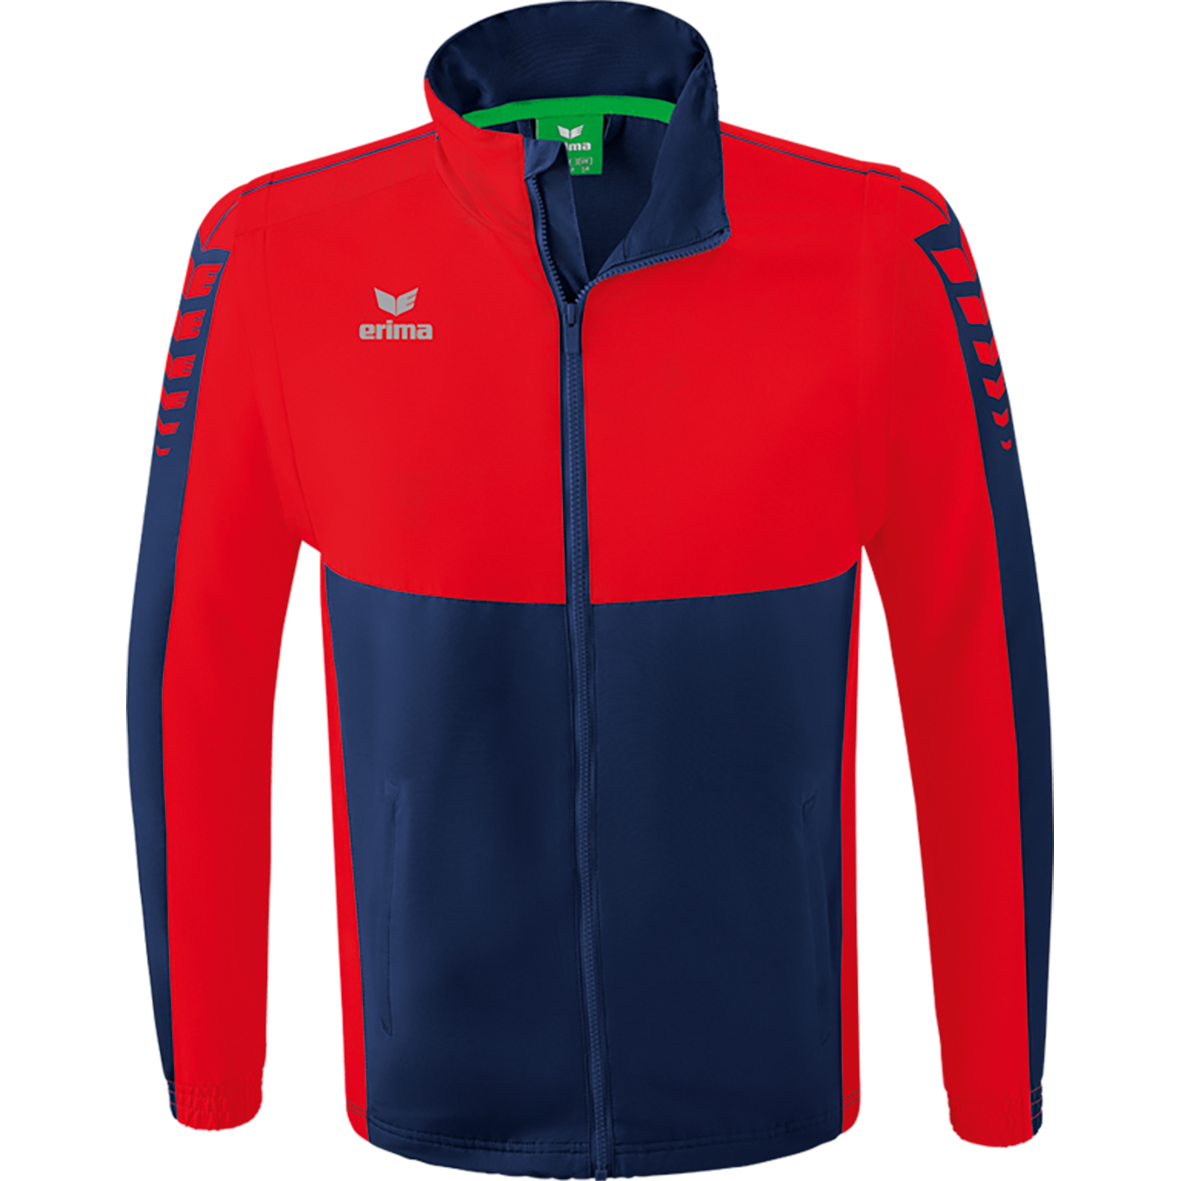 ERIMA SIX WINGS JACKET WITH DETACHABLE SLEEVES, NEW NAVY-RED MEN.